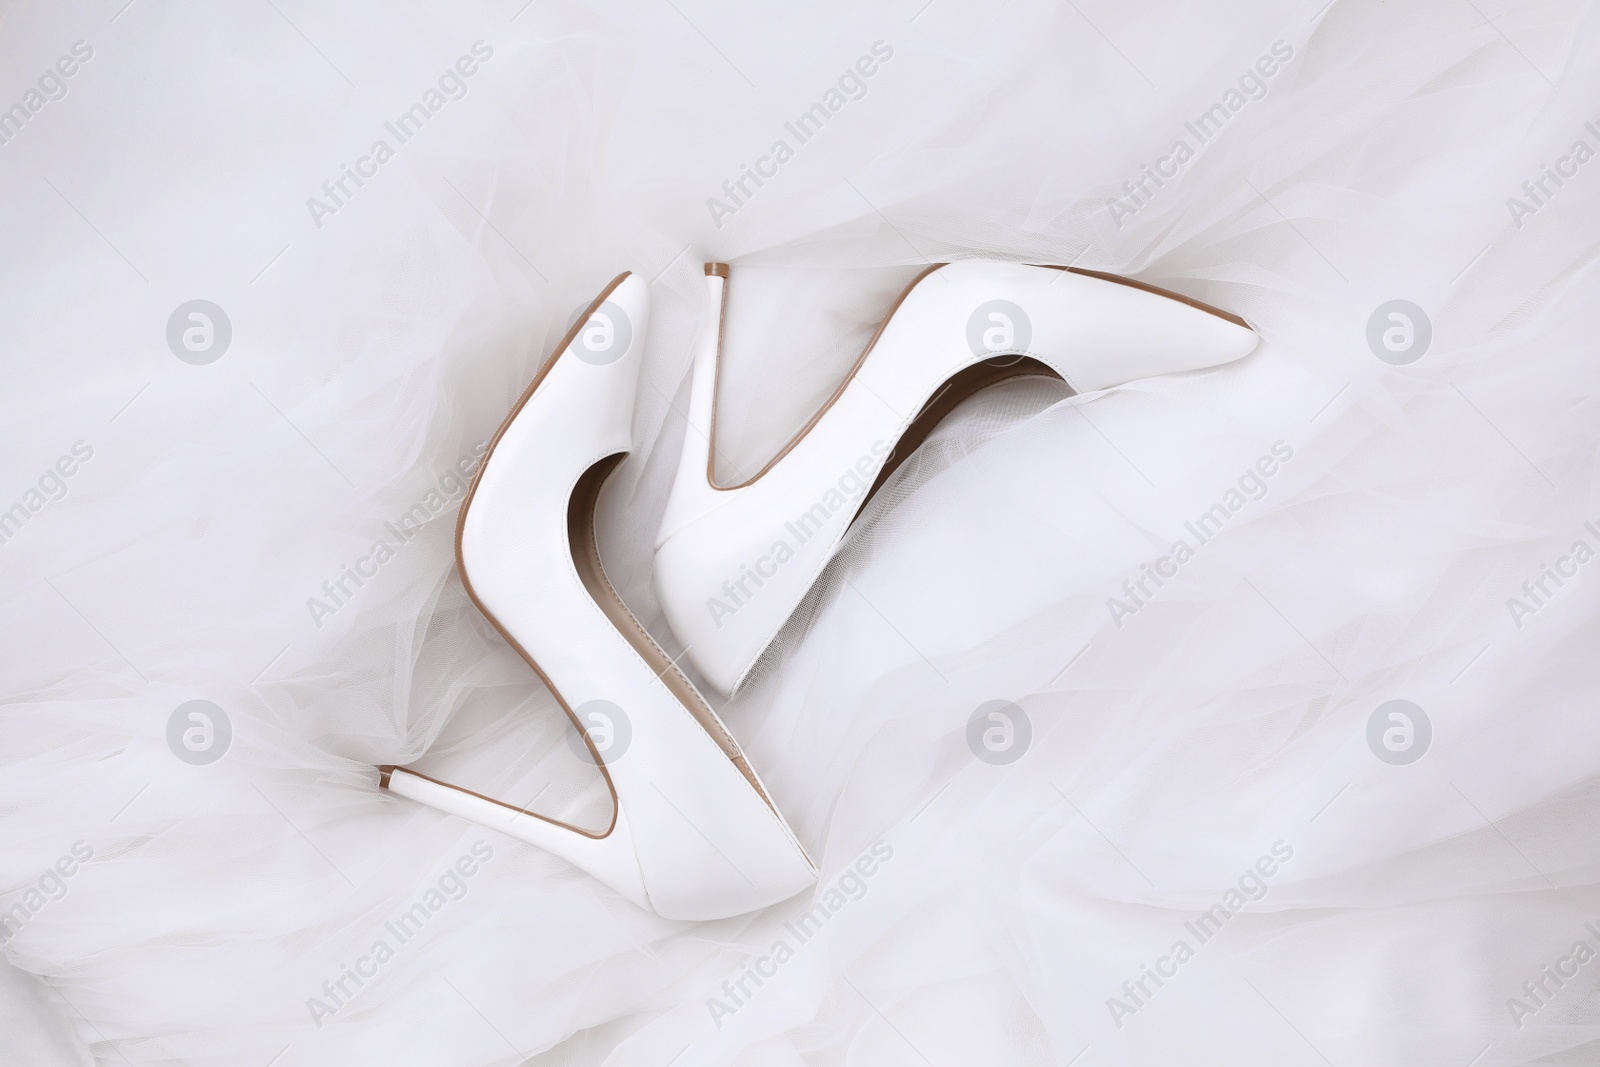 Photo of Pair of wedding high heel shoes on white veil, flat lay